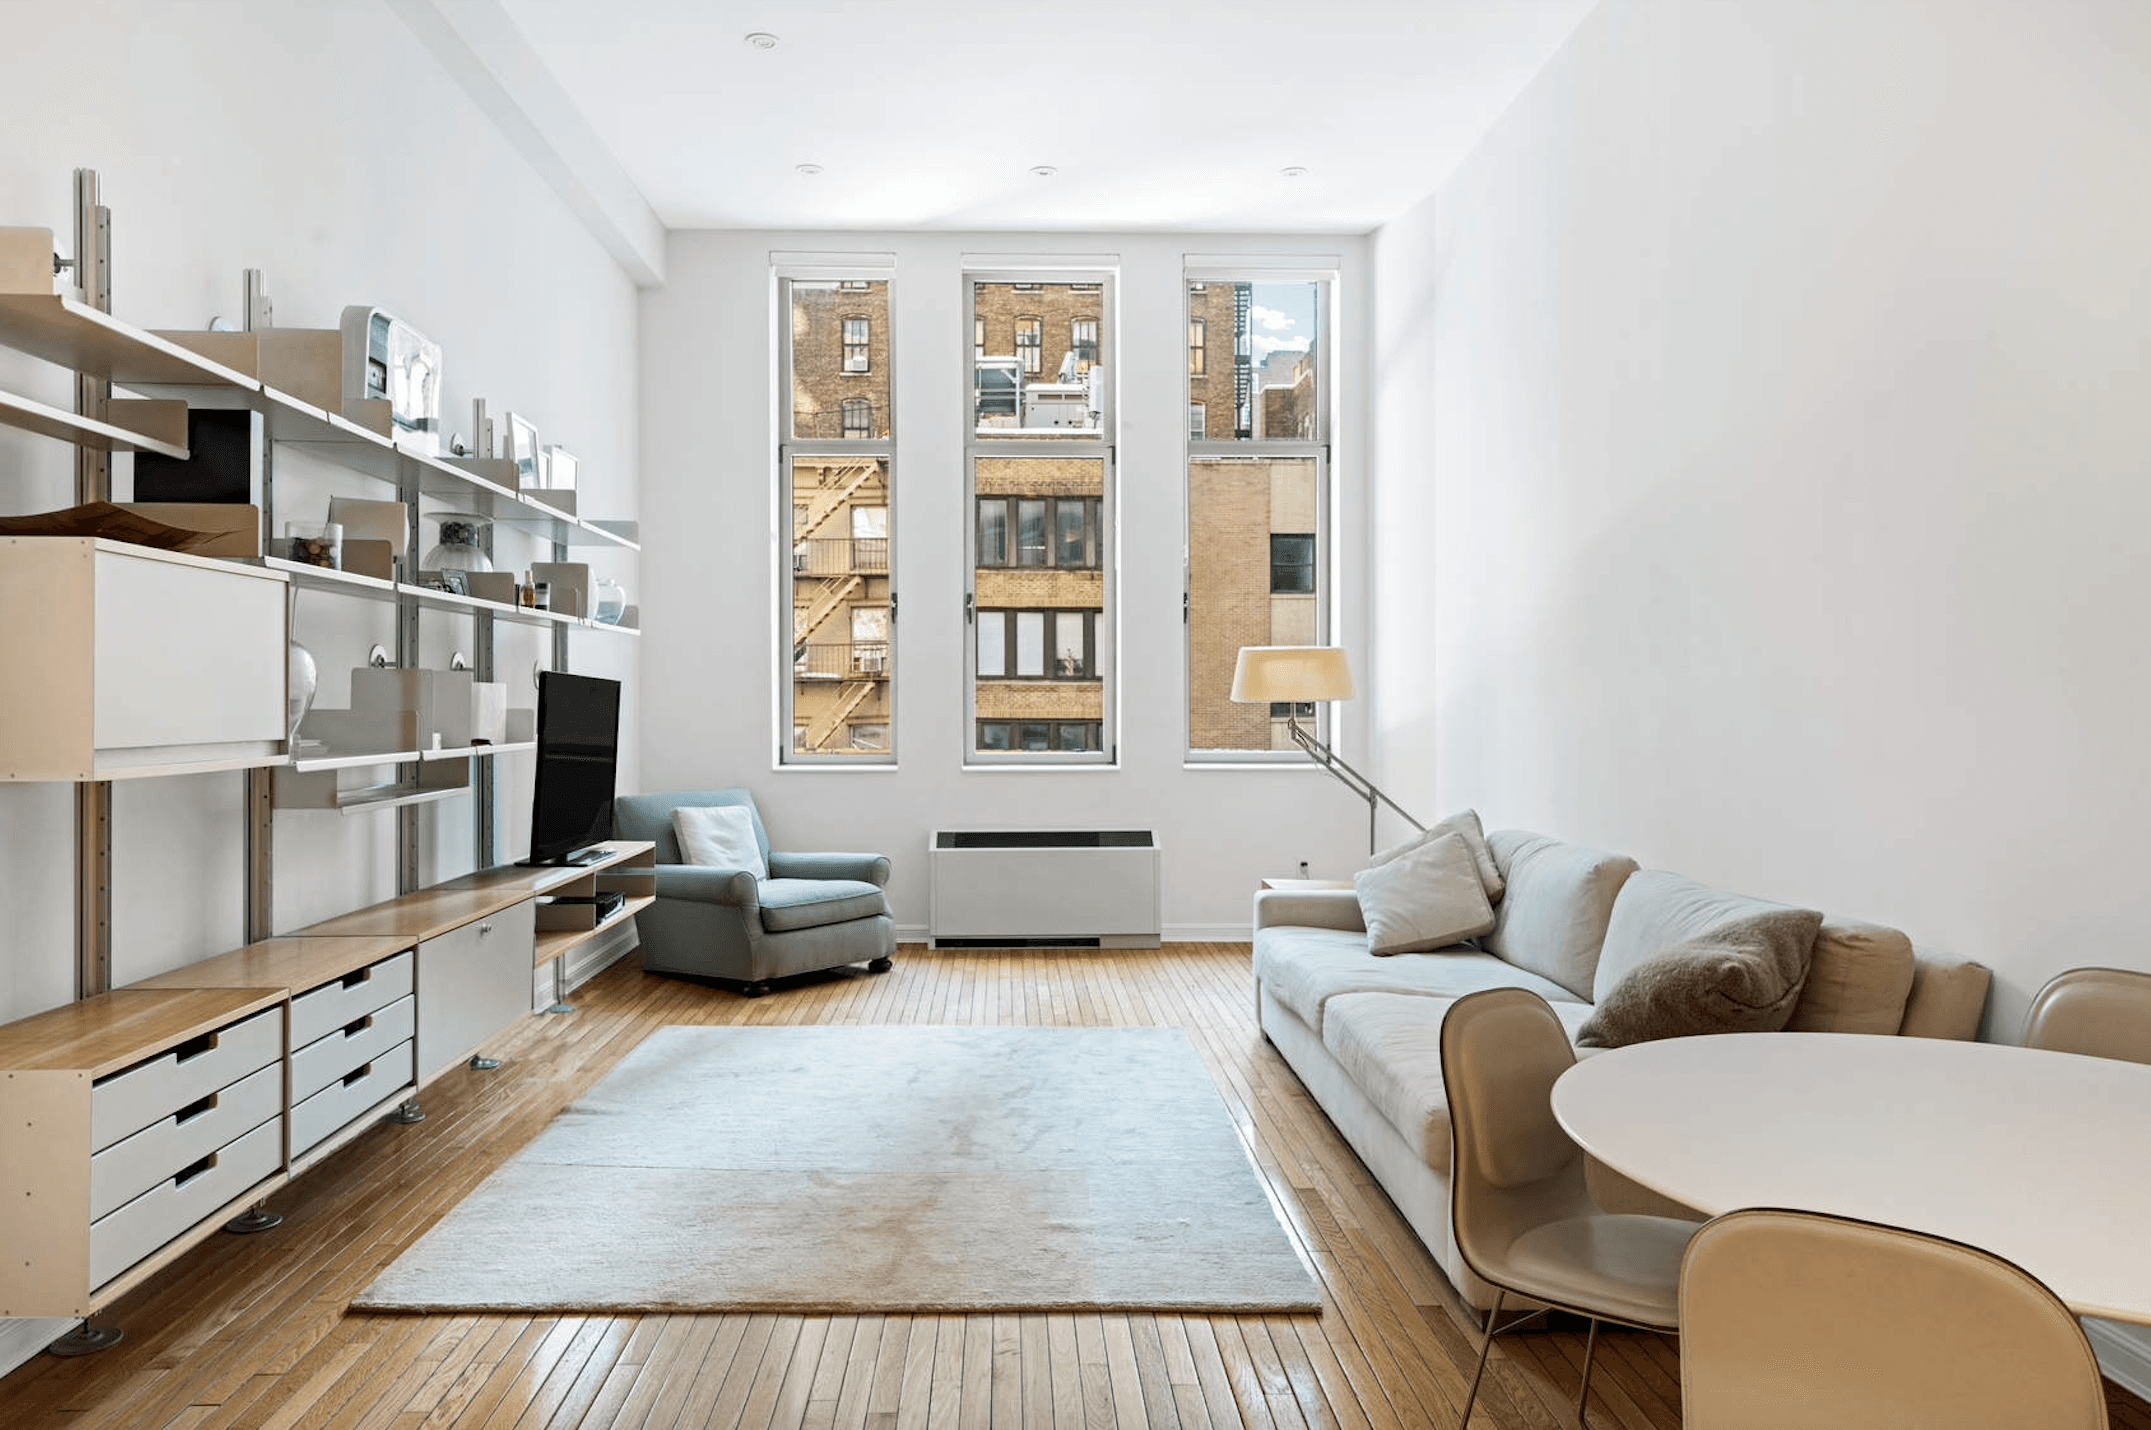 Welcome home to this light filled loft renovated to perfection !